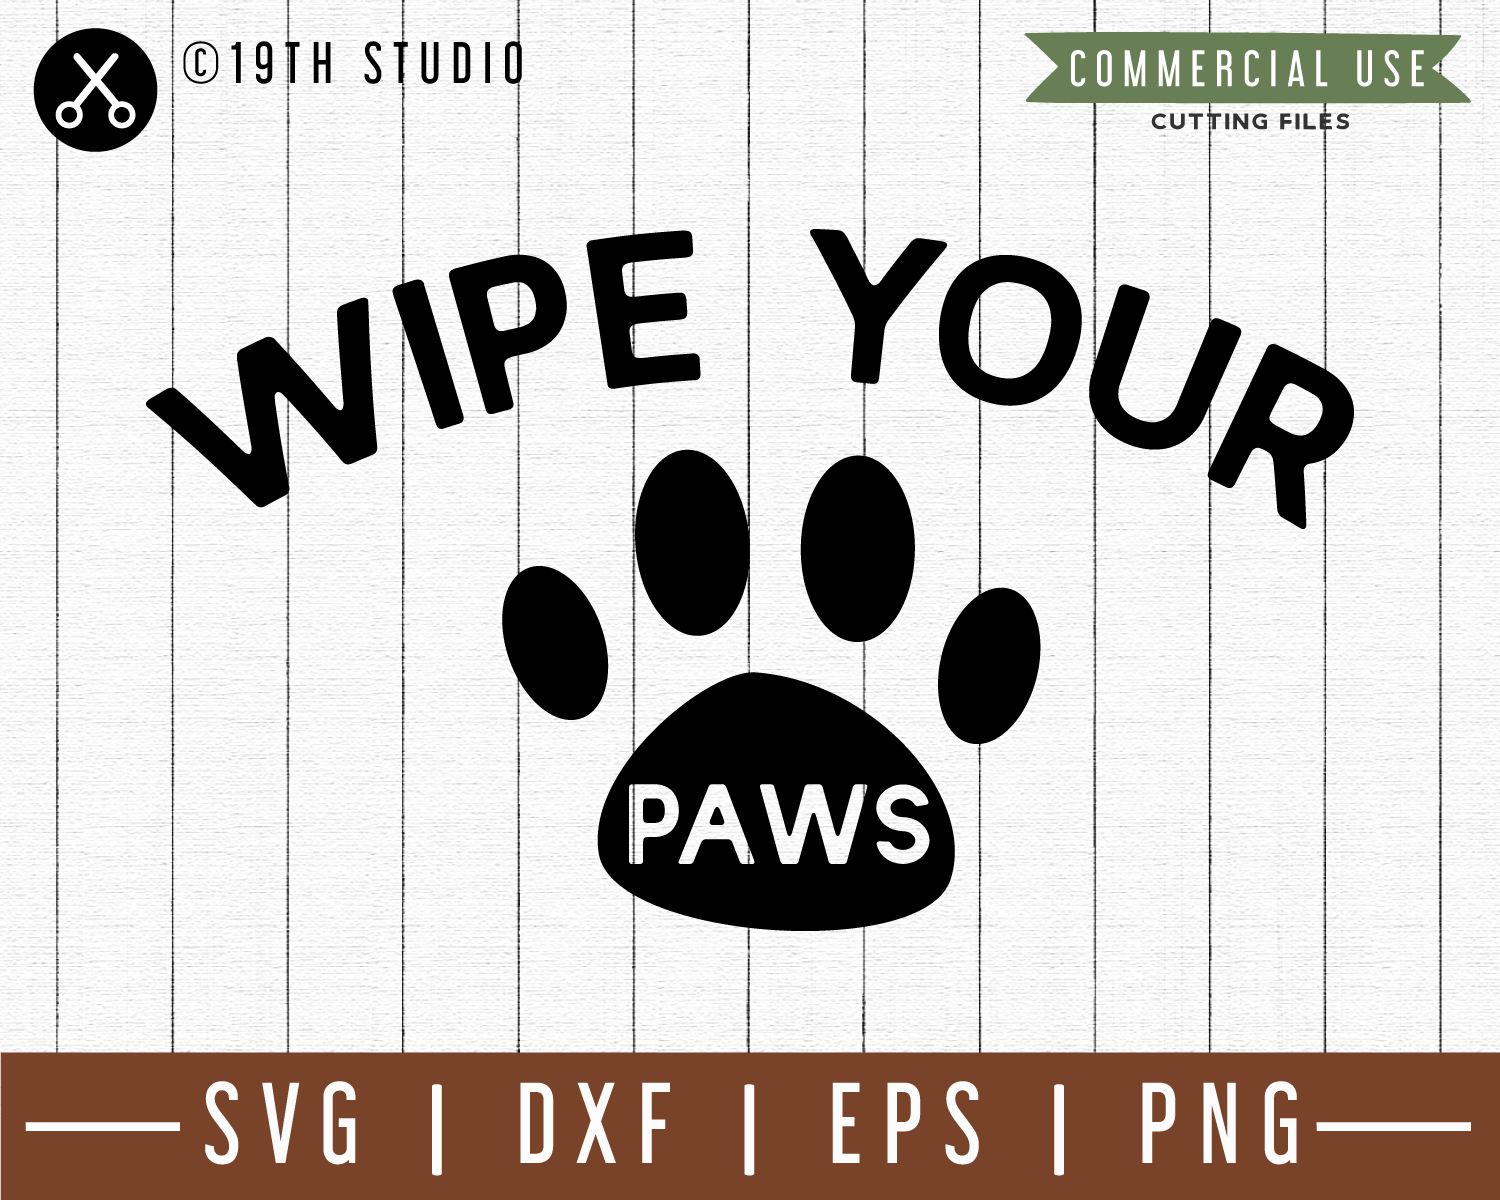 Wipe your paws SVG |M49F| A Doormat SVG file Craft House SVG - SVG files for Cricut and Silhouette